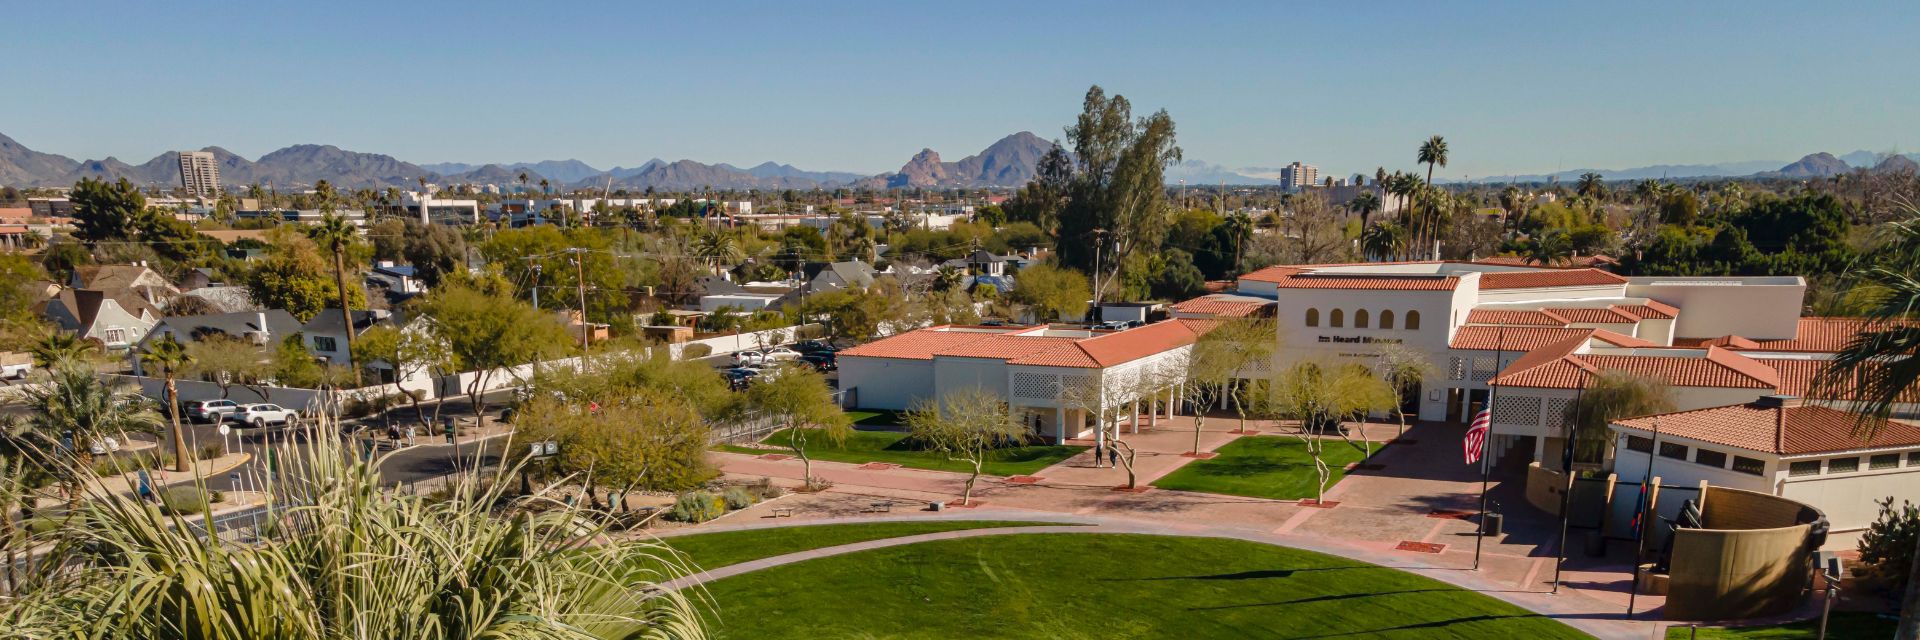 An aerial view of Heard campus with trees and mountains in the background.